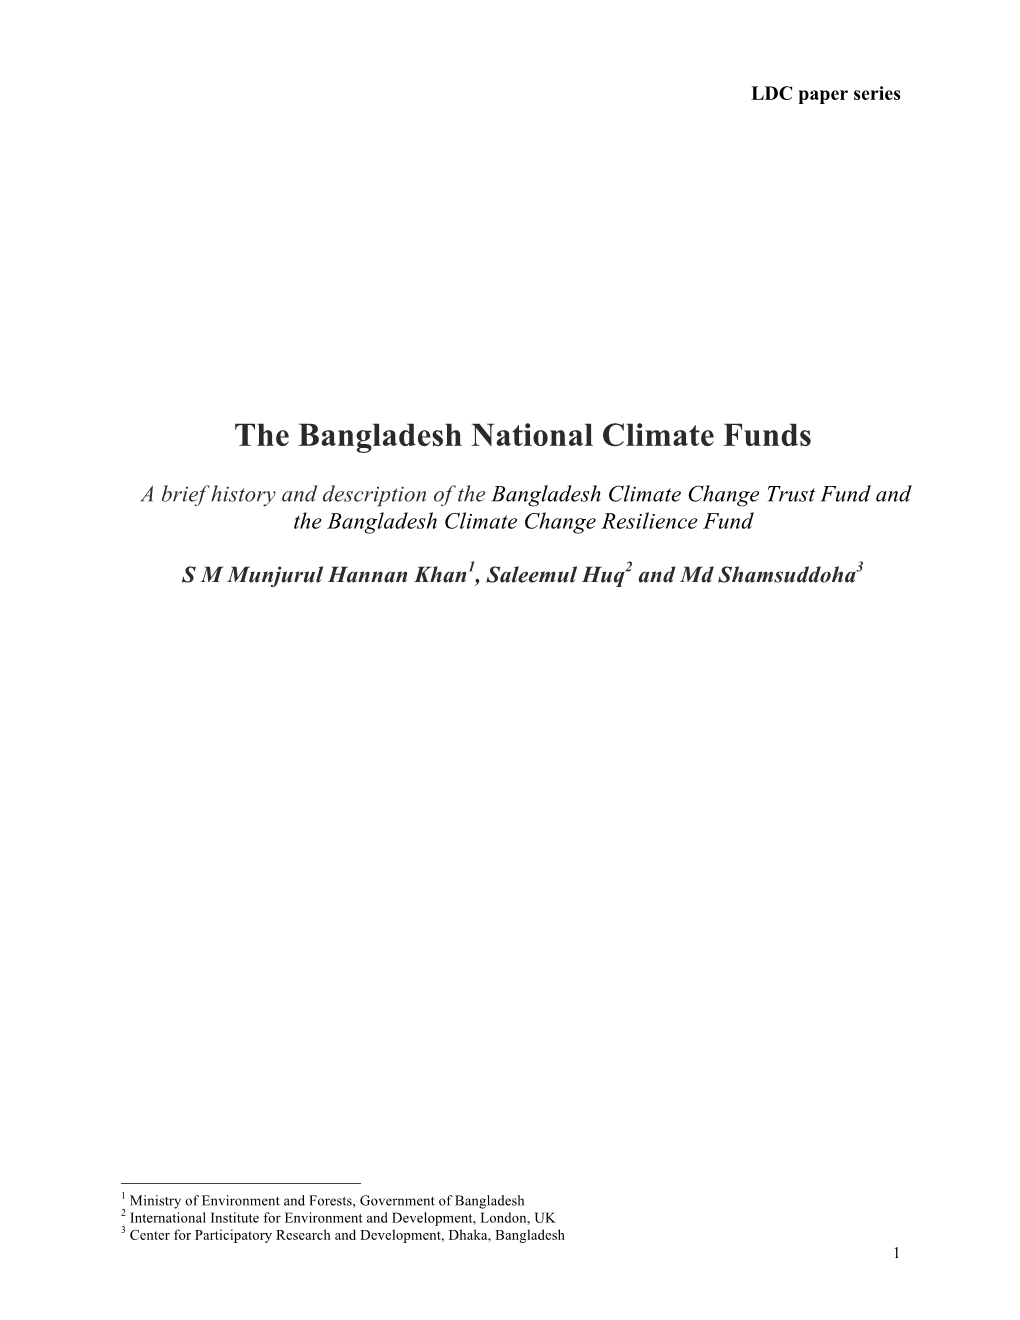 The Bangladesh National Climate Funds